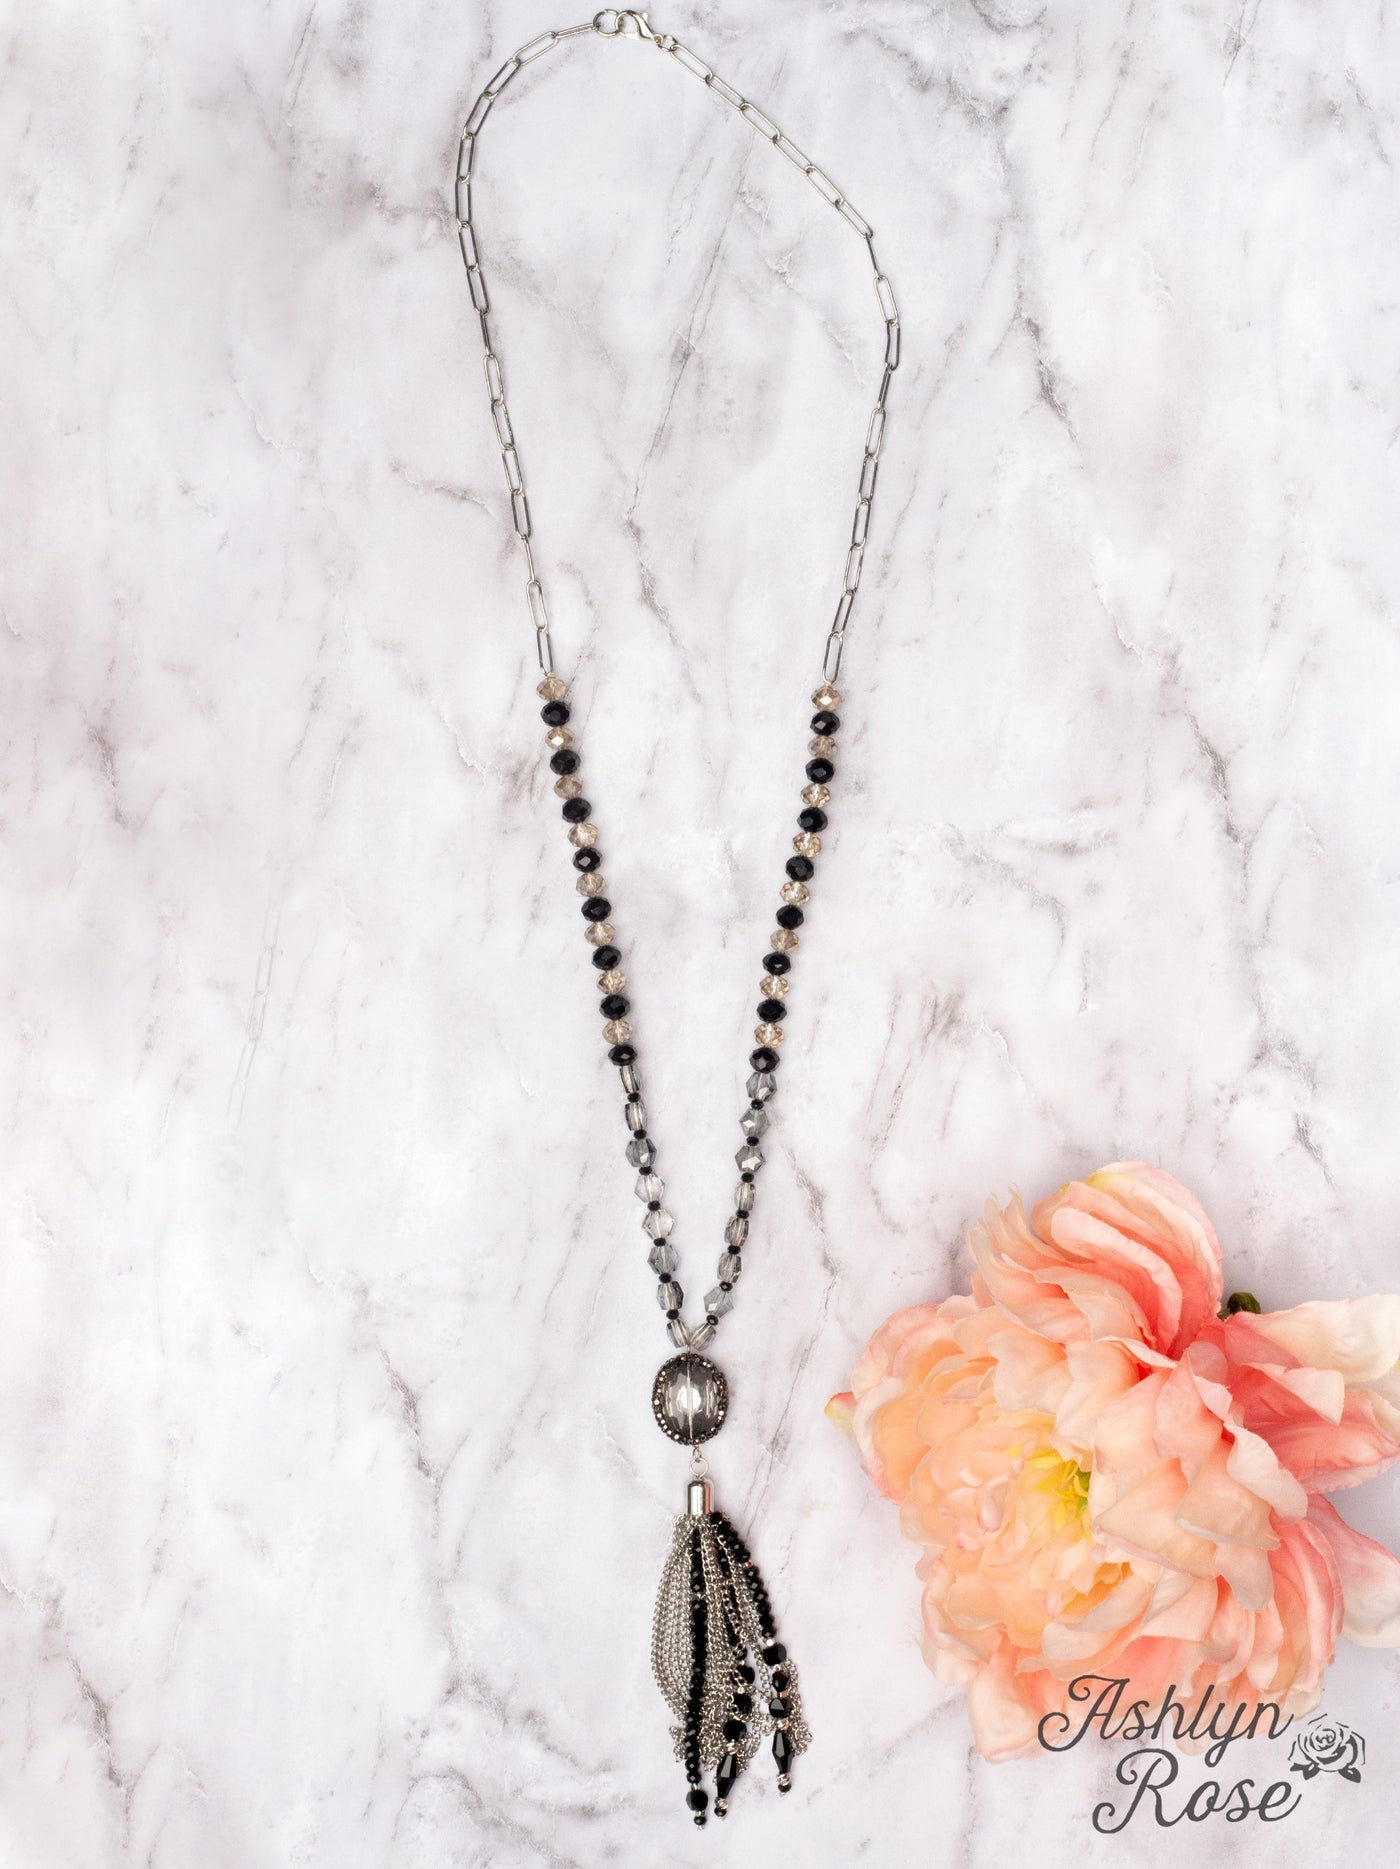 ROSÉ ALL DAY CLEAR BLACK CRYSTAL TASSEL PENDANT ON A SILVER LINKED CHAIN GREY BEADED NECKLACE